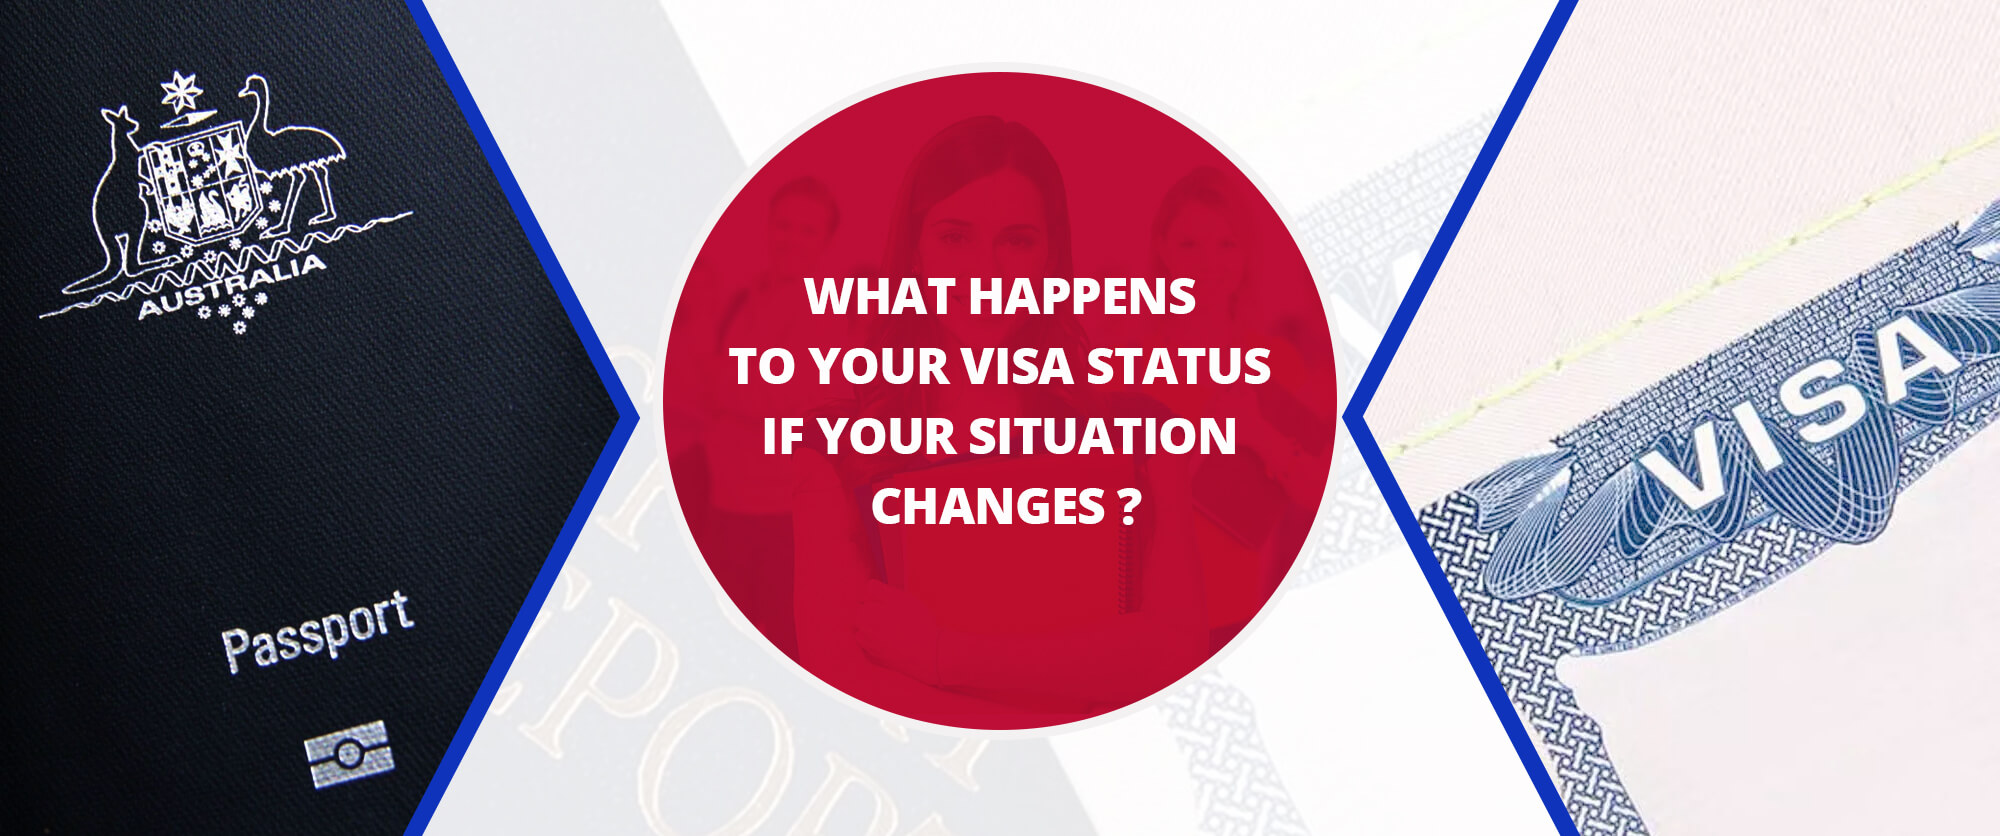 What Happens to Your Visa Status if Your Situation Changes